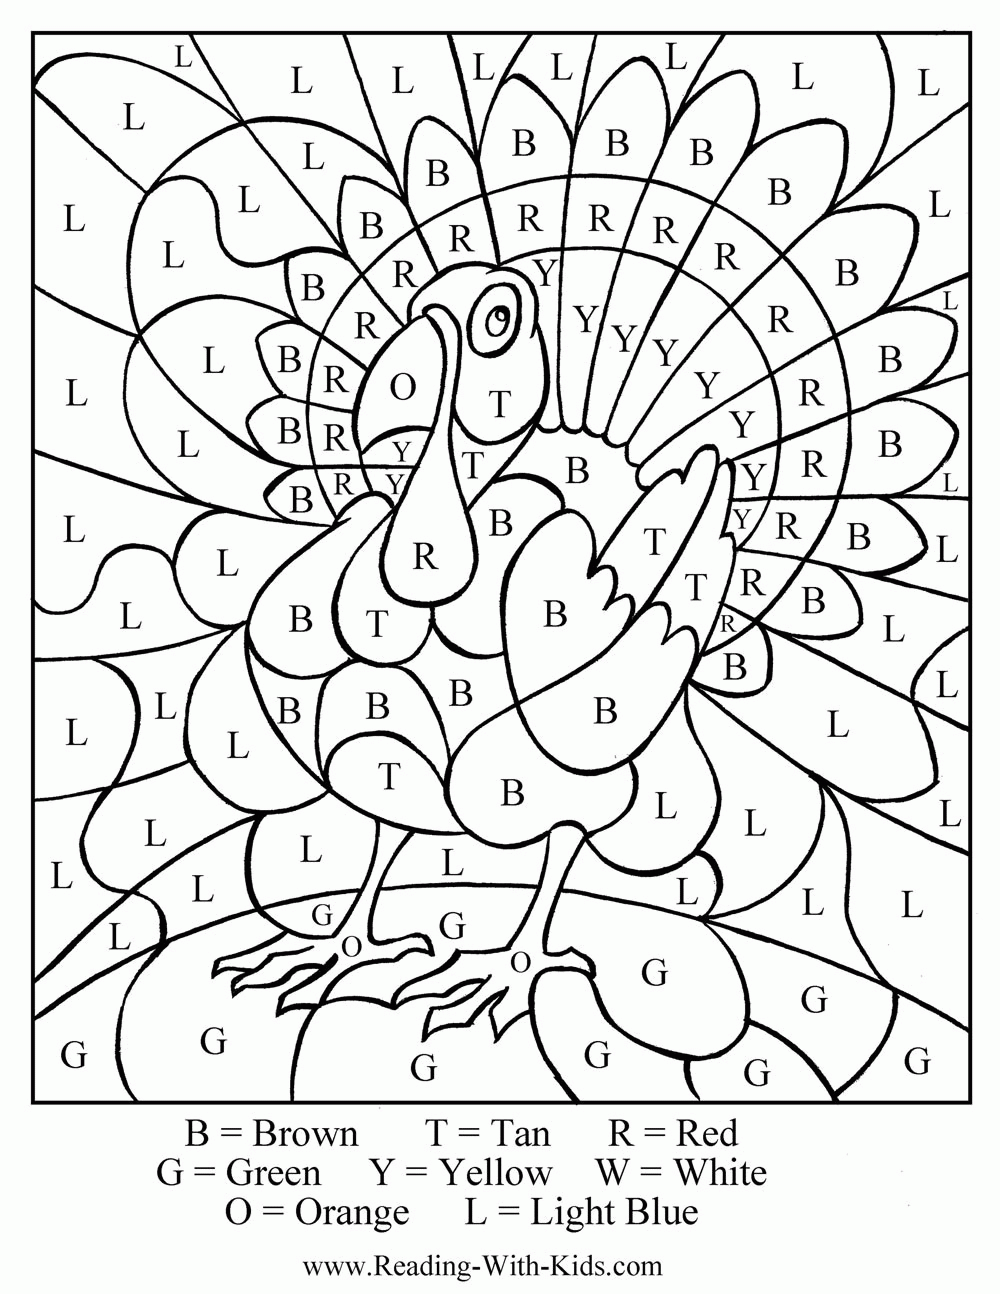 Free Printable November Coloring Pages - High Quality Coloring Pages